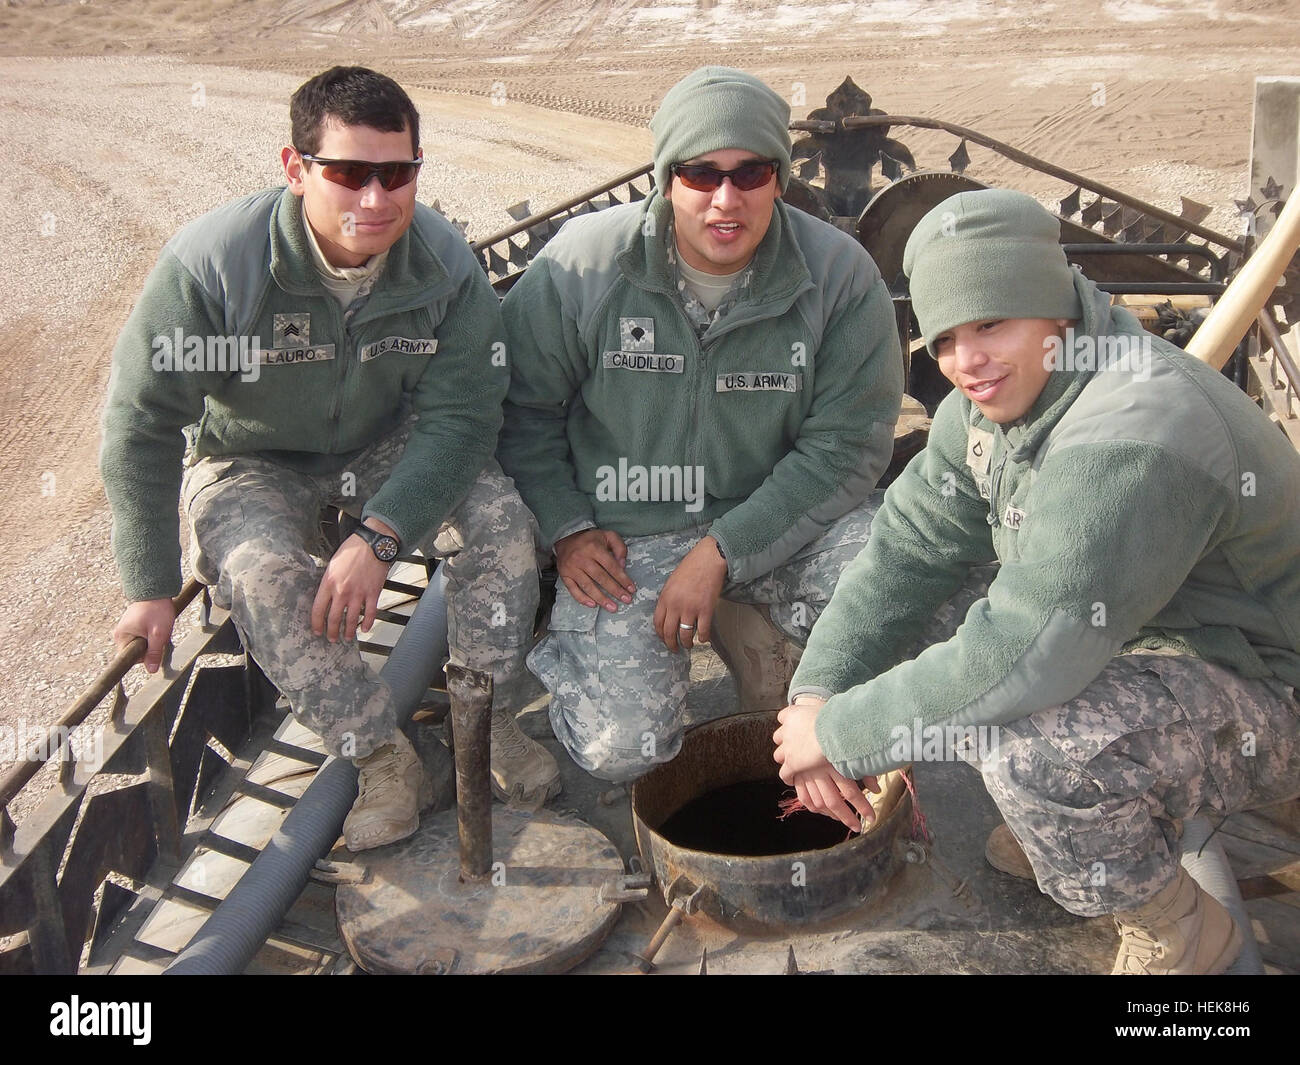 From left, U.S. Army Sgt. Jordan Lauro, Brooking, Ore., Spc. Juan Caudillo, El Paso, Texas, and Pfc. Bryan Aleman, Dallas, all water treatment specialists with Company A, 404th Aviation Support Battalion, 4th Combat Aviation Brigade, 4th Infantry Division, ISAF purify and distribute potable water to military and civilian personnel who reside on Camp Marmal. (Photo by: U.S. Army) 4th CAB Water Dogs dig for water in the desert 361039 Stock Photo